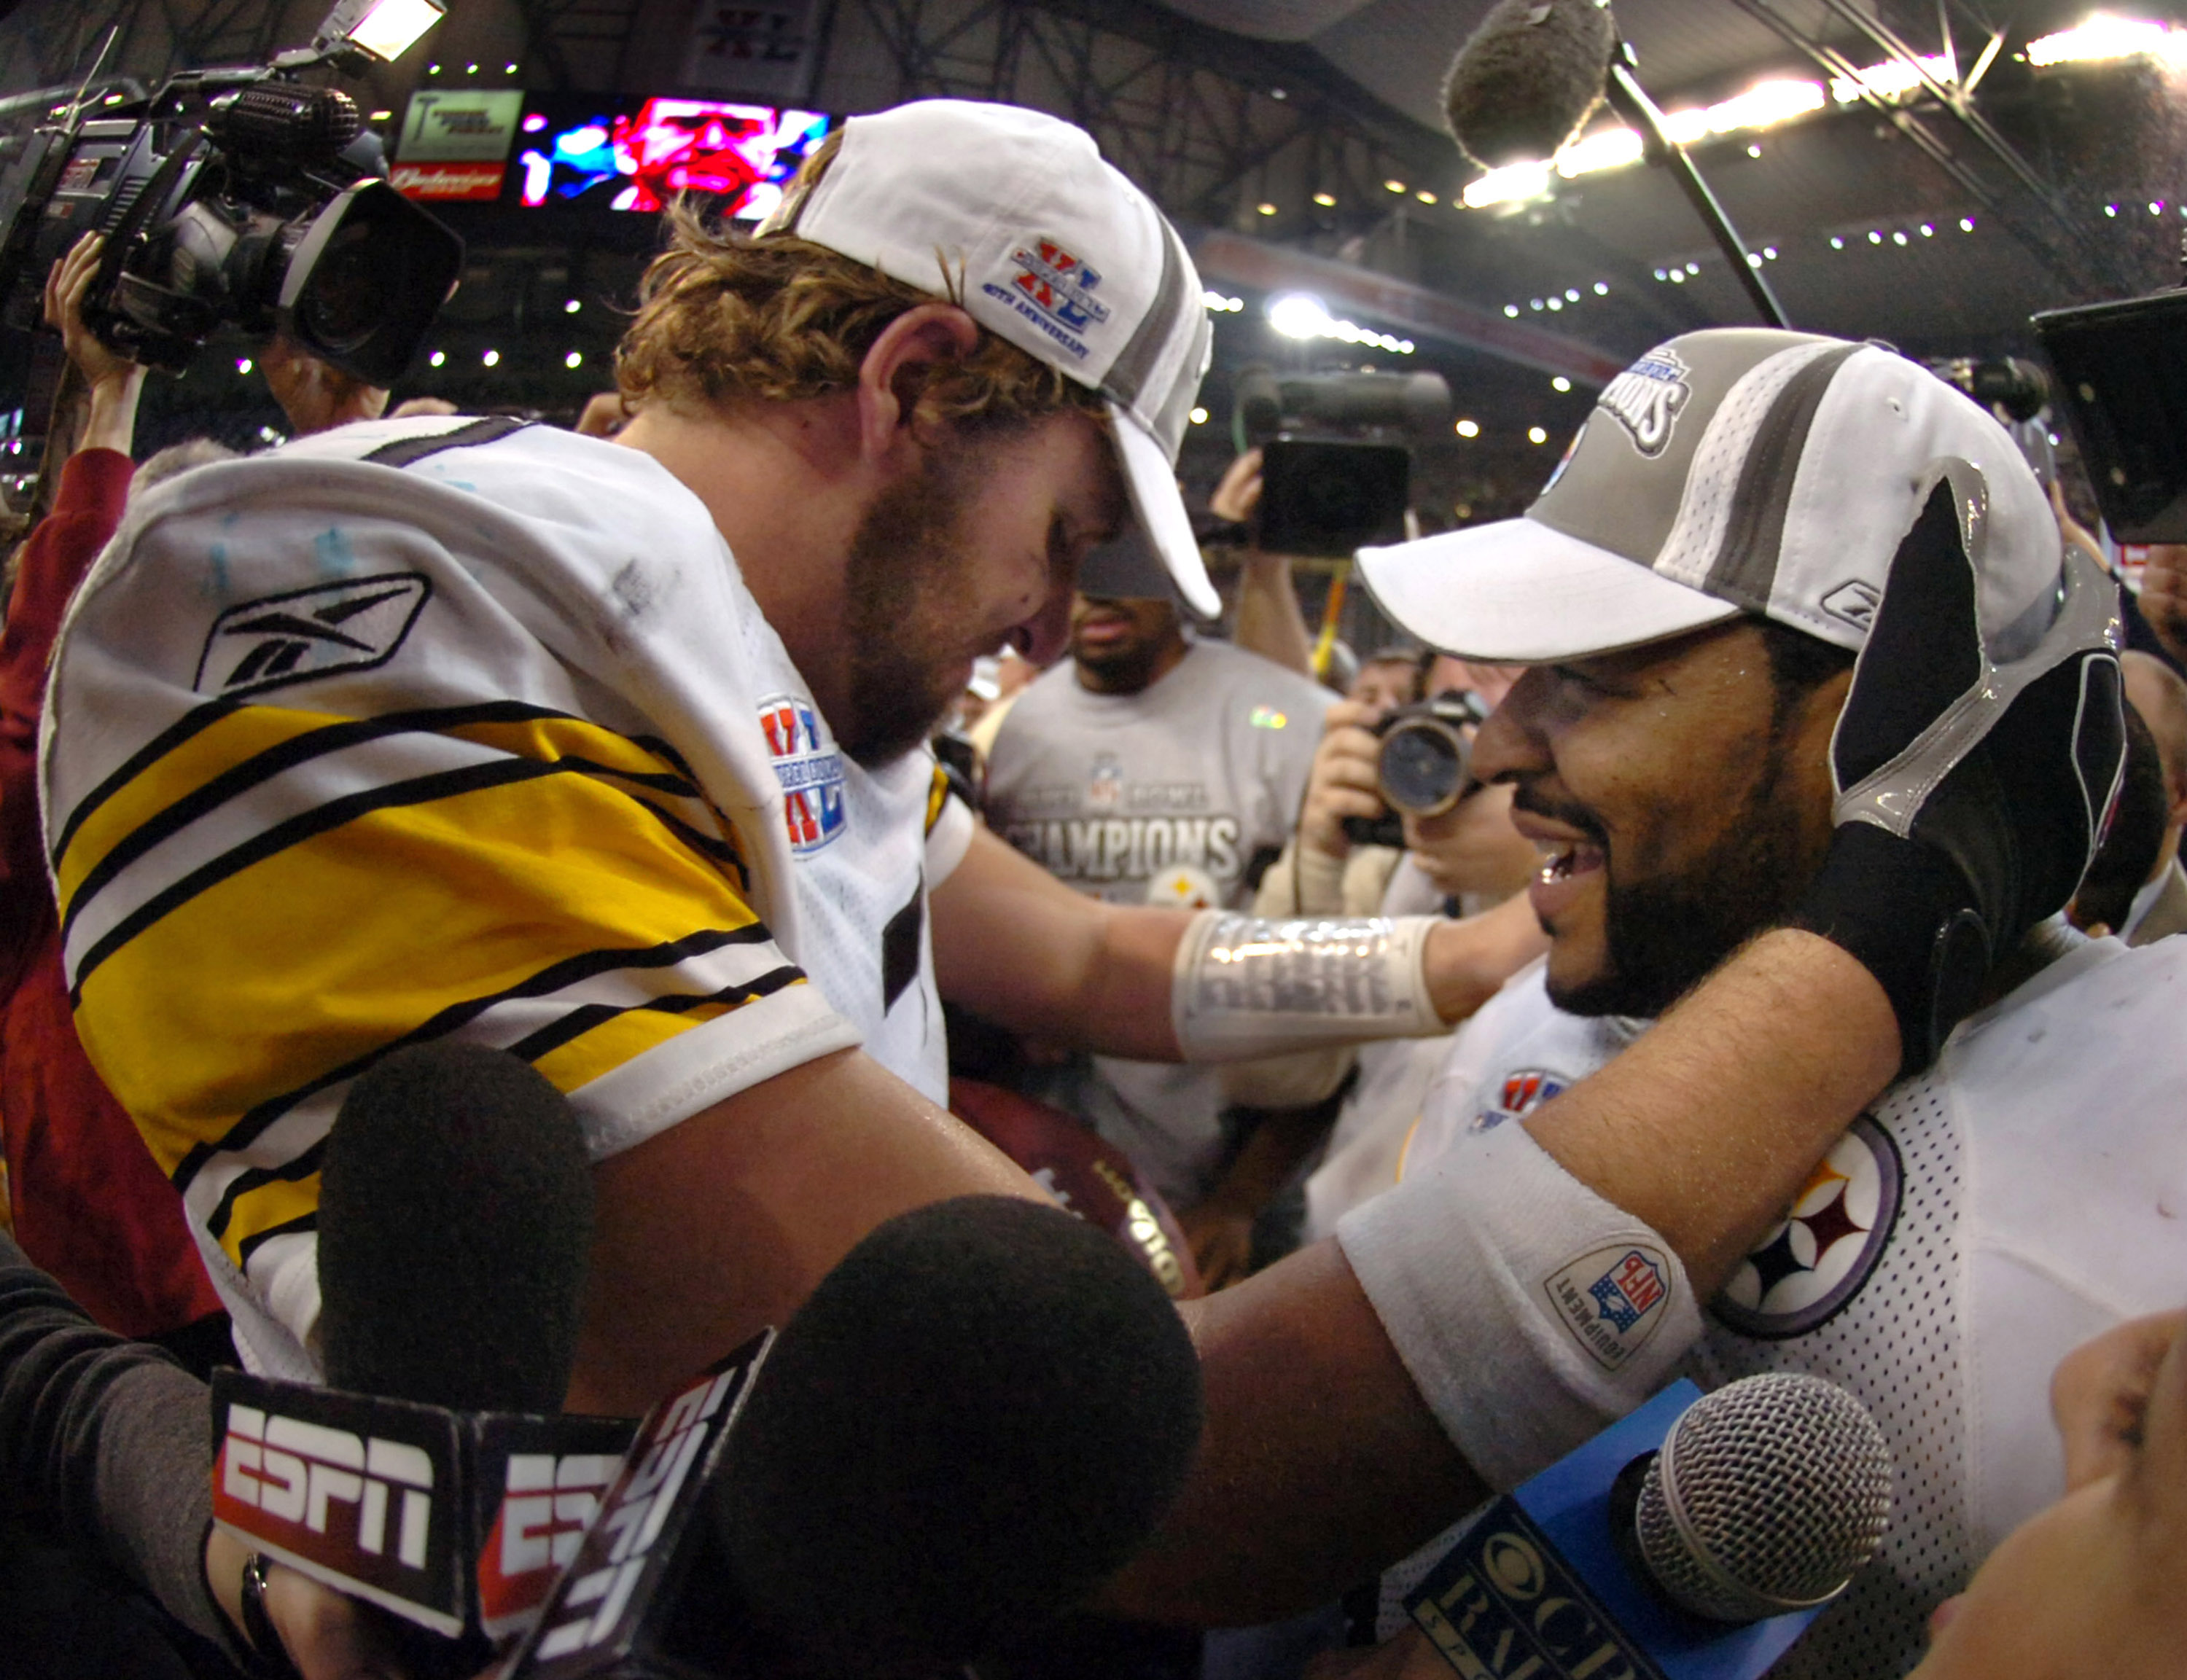 Ben Roethlisberger and Jerome Bettis of the Pittsburgh Steelers celebrate after Super Bowl XL between the Pittsburgh Steelers and Seattle Seahawks at Ford Field in Detroit, Michigan on February 5, 2006. (Photo by A. Messerschmidt/Getty Images)